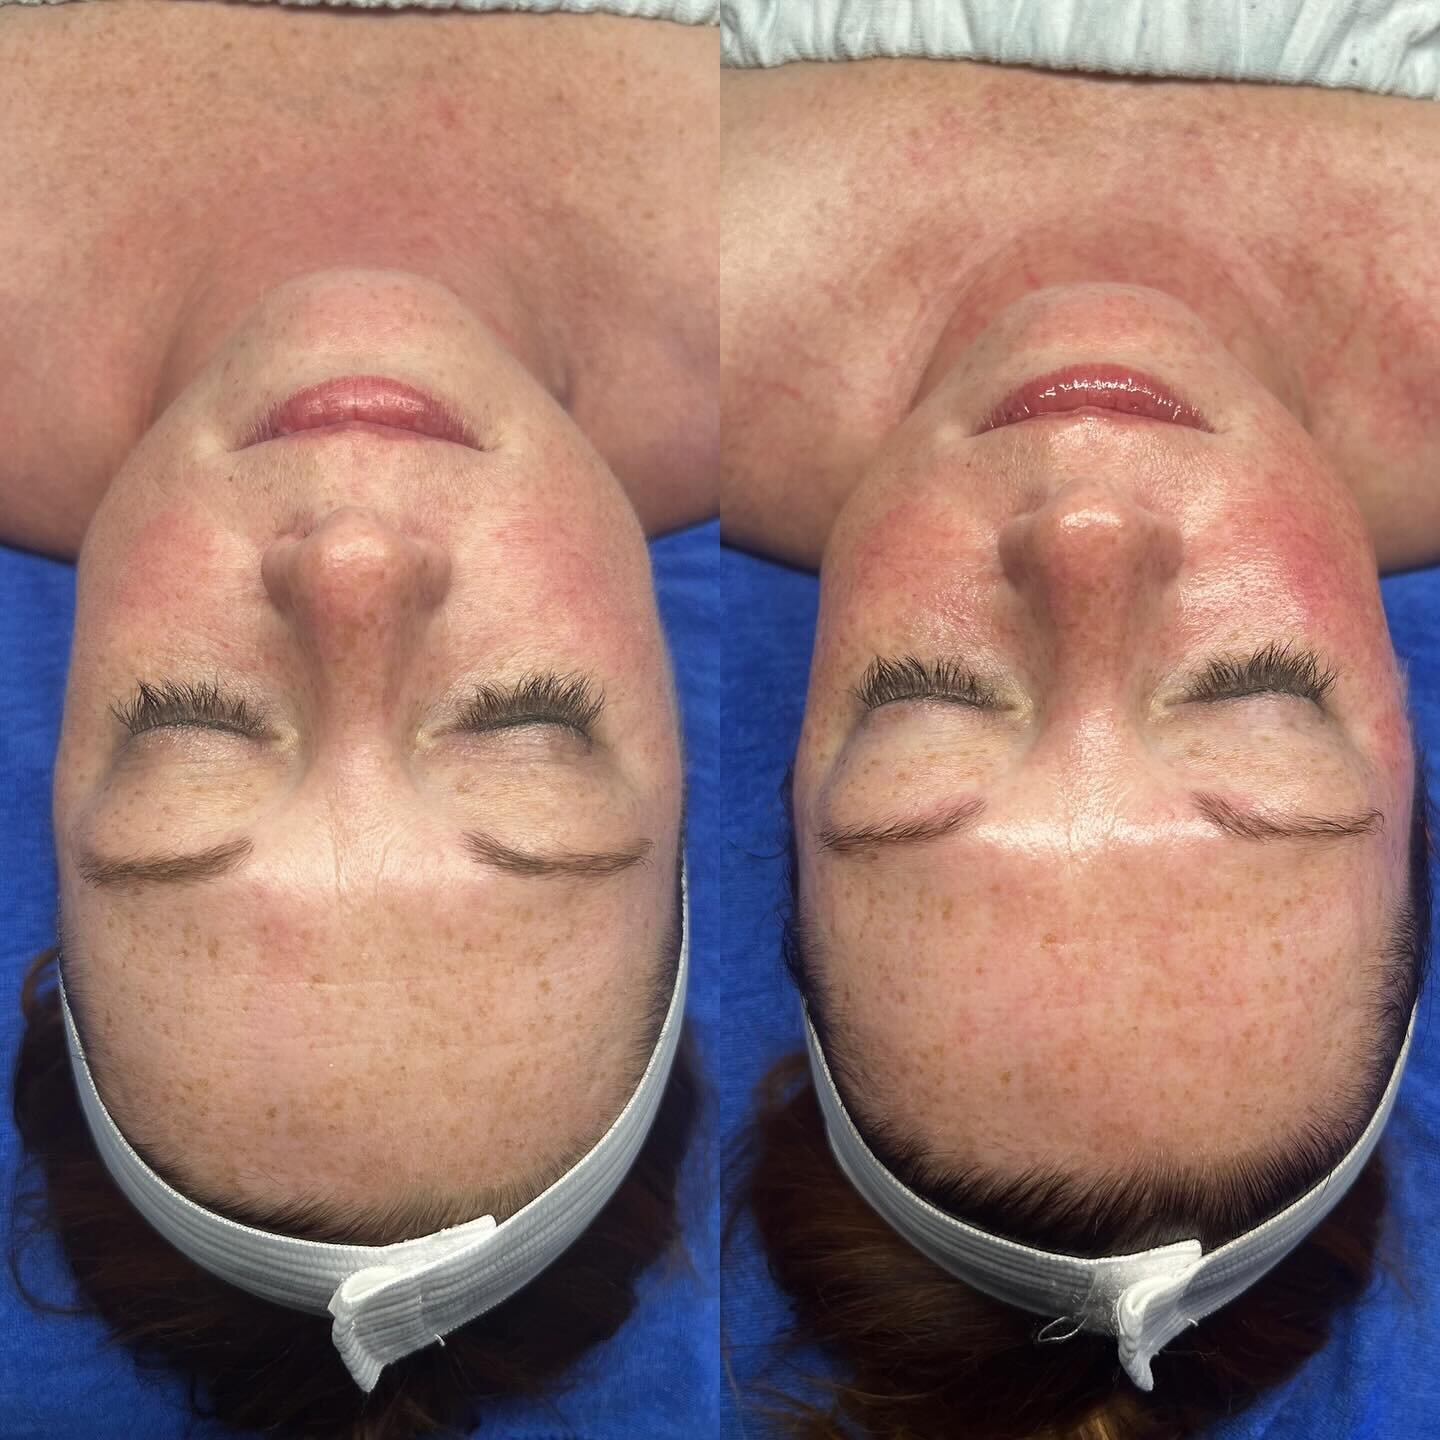 Beyond Botox 🩵HydraFacial🩵

Take the amazing Beyond Botox Facial and combine it with a Platinum HydraFacial to get this MAGIC! The dilated capillaries (spider vein effect) show the magic really working, bringing in nutrients and flushing out waste.